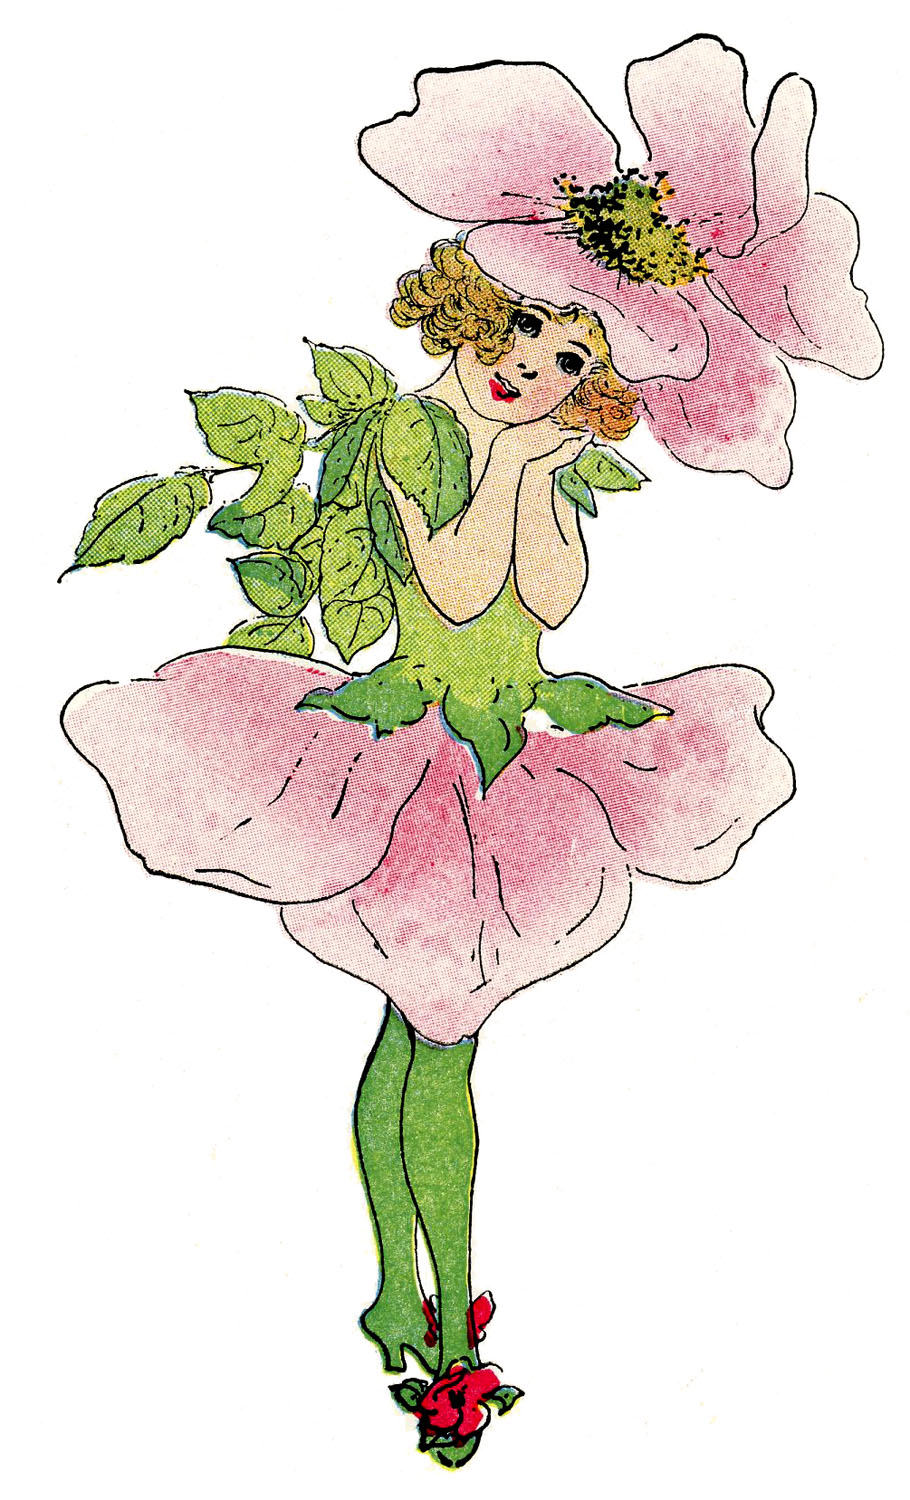 Vintage Fairy Image   Rose Flower Girl   The Graphics Fairy